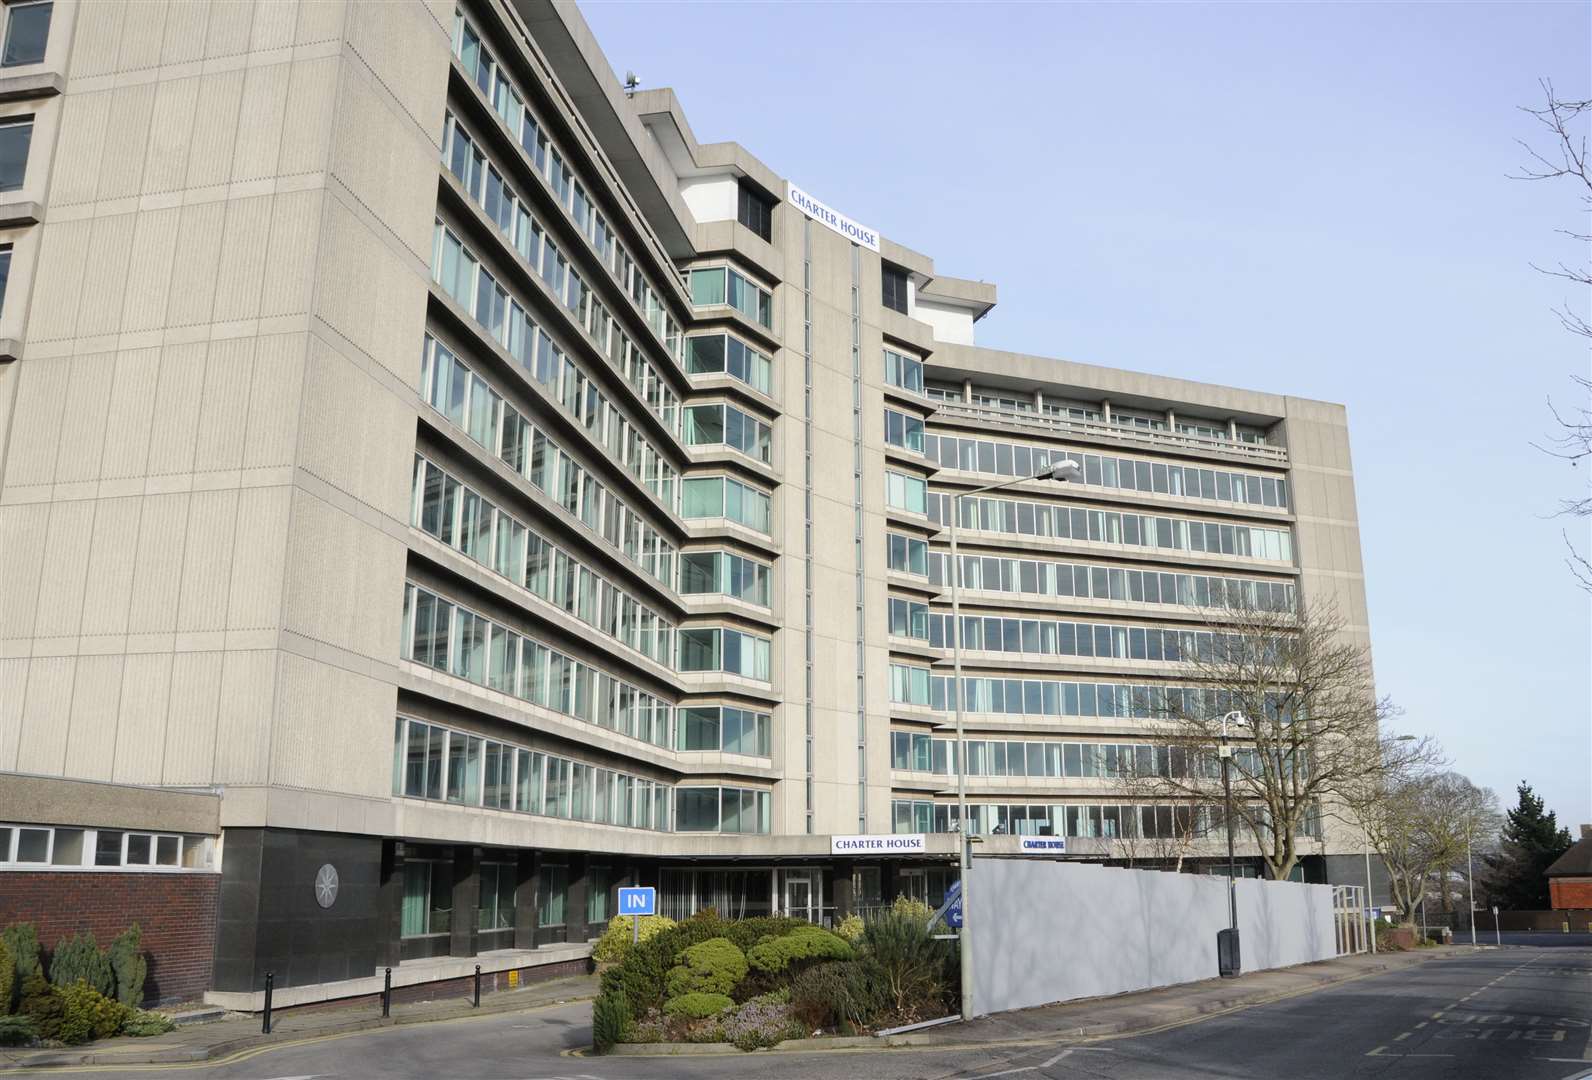 Charter House – once an office block home to the likes of Sealink – today the Panorama apartment block